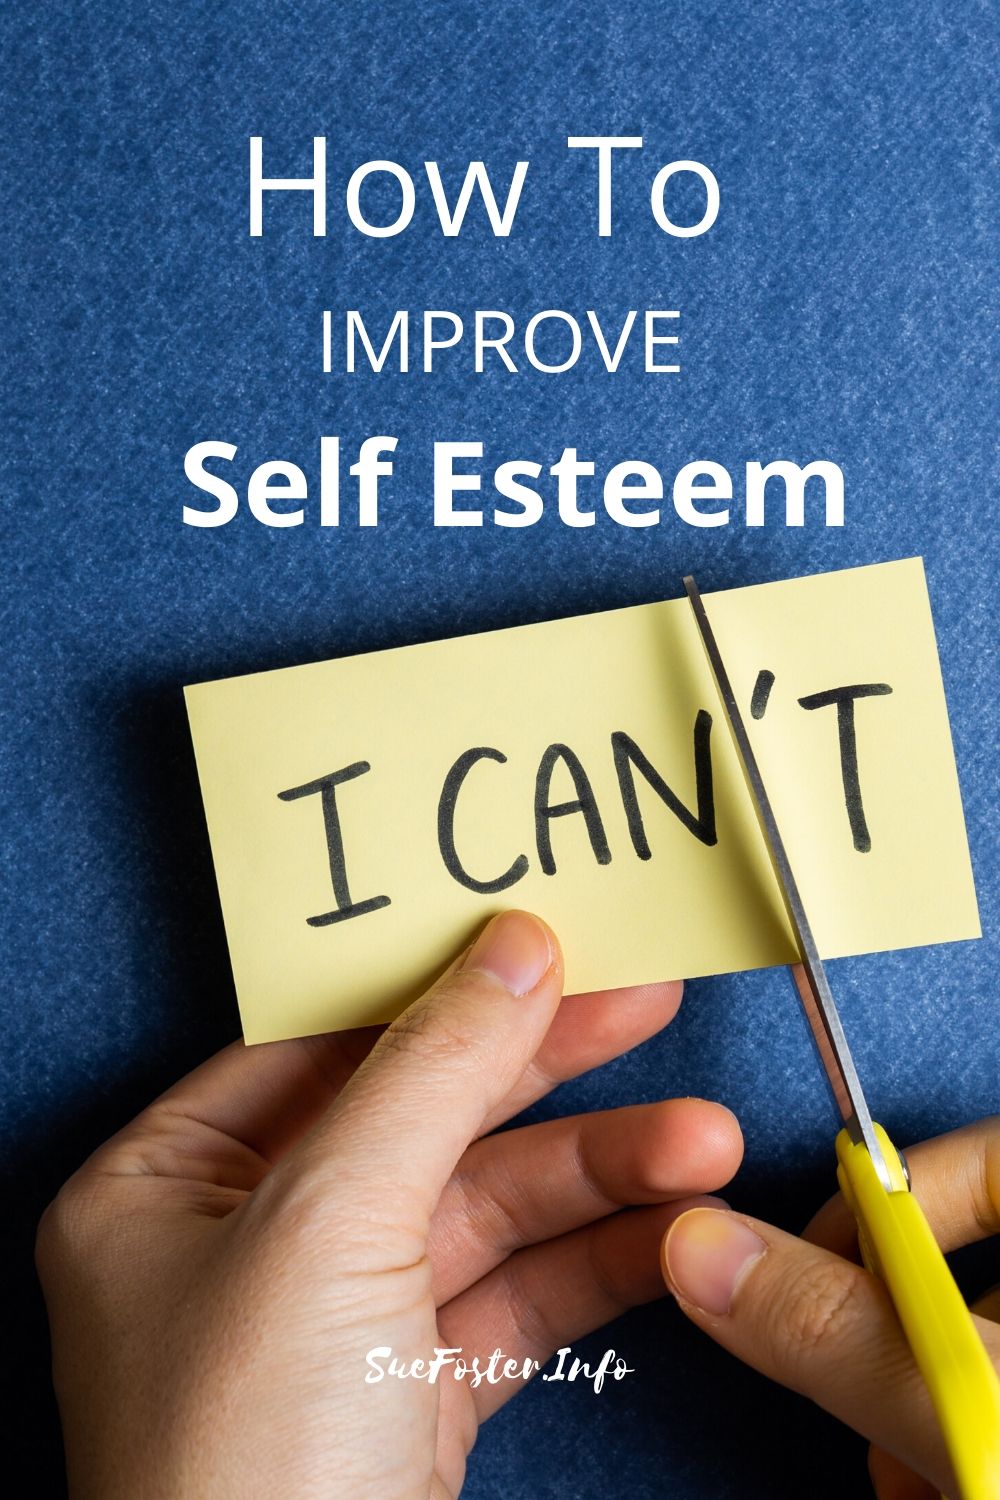 Things you can do to improve self esteem